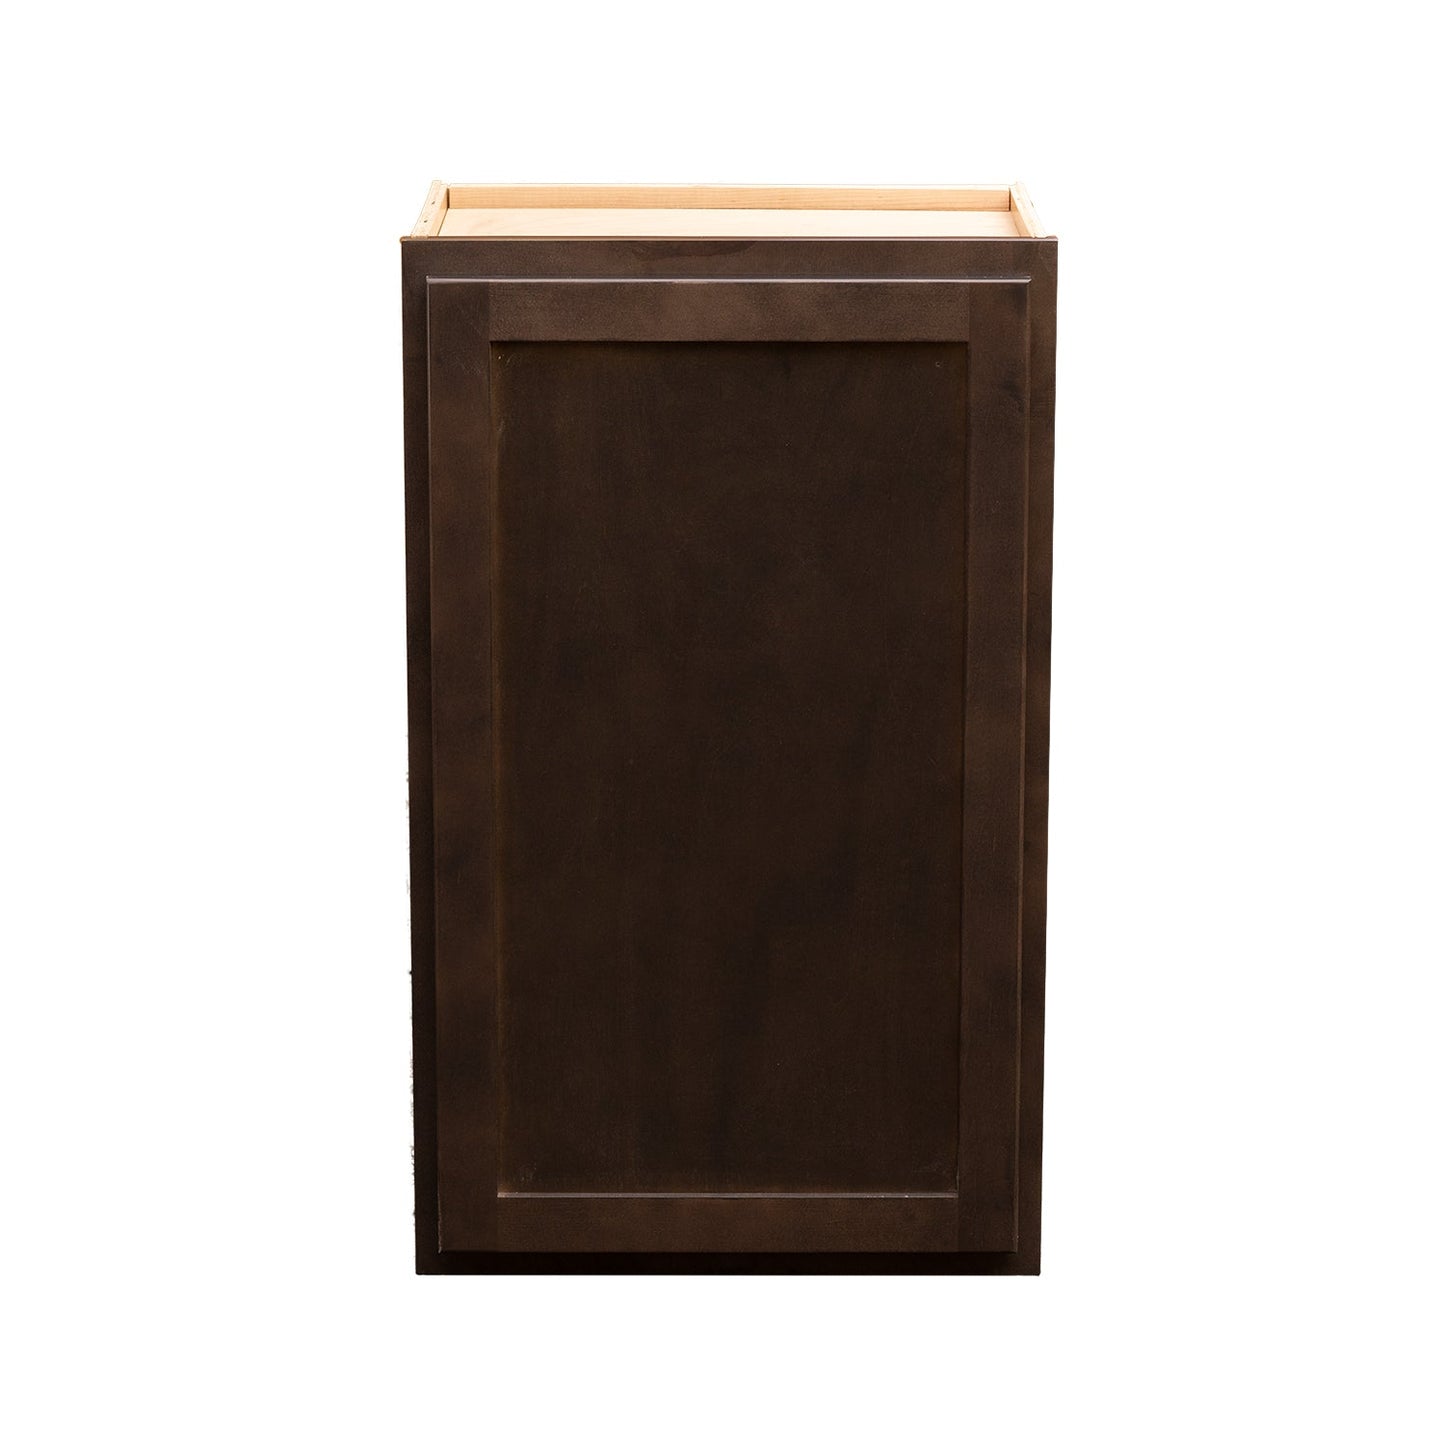 Backwoods Cabinetry RTA (Ready-to-Assemble) Espresso Stain 18"Wx30"Hx12"D Wall Cabinet